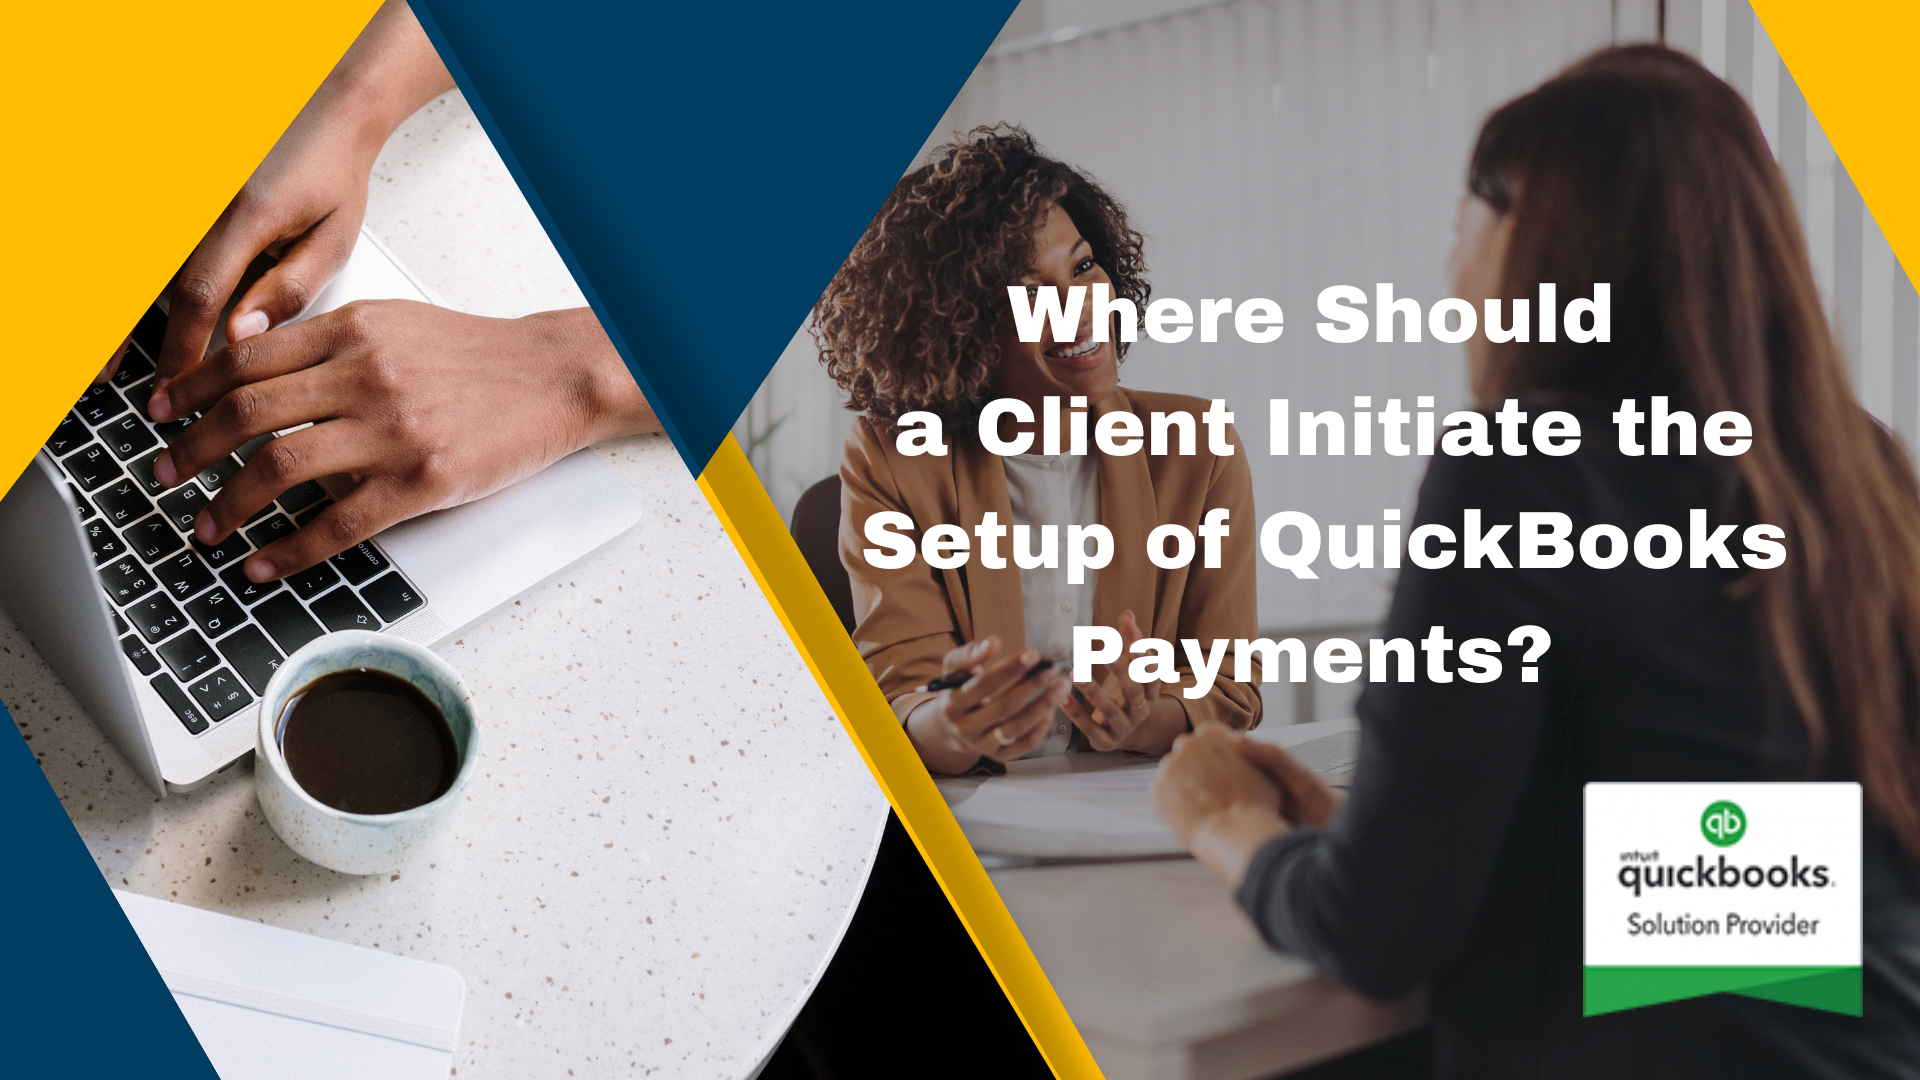 Where Should a Client Initiate the Setup of QuickBooks Payments?